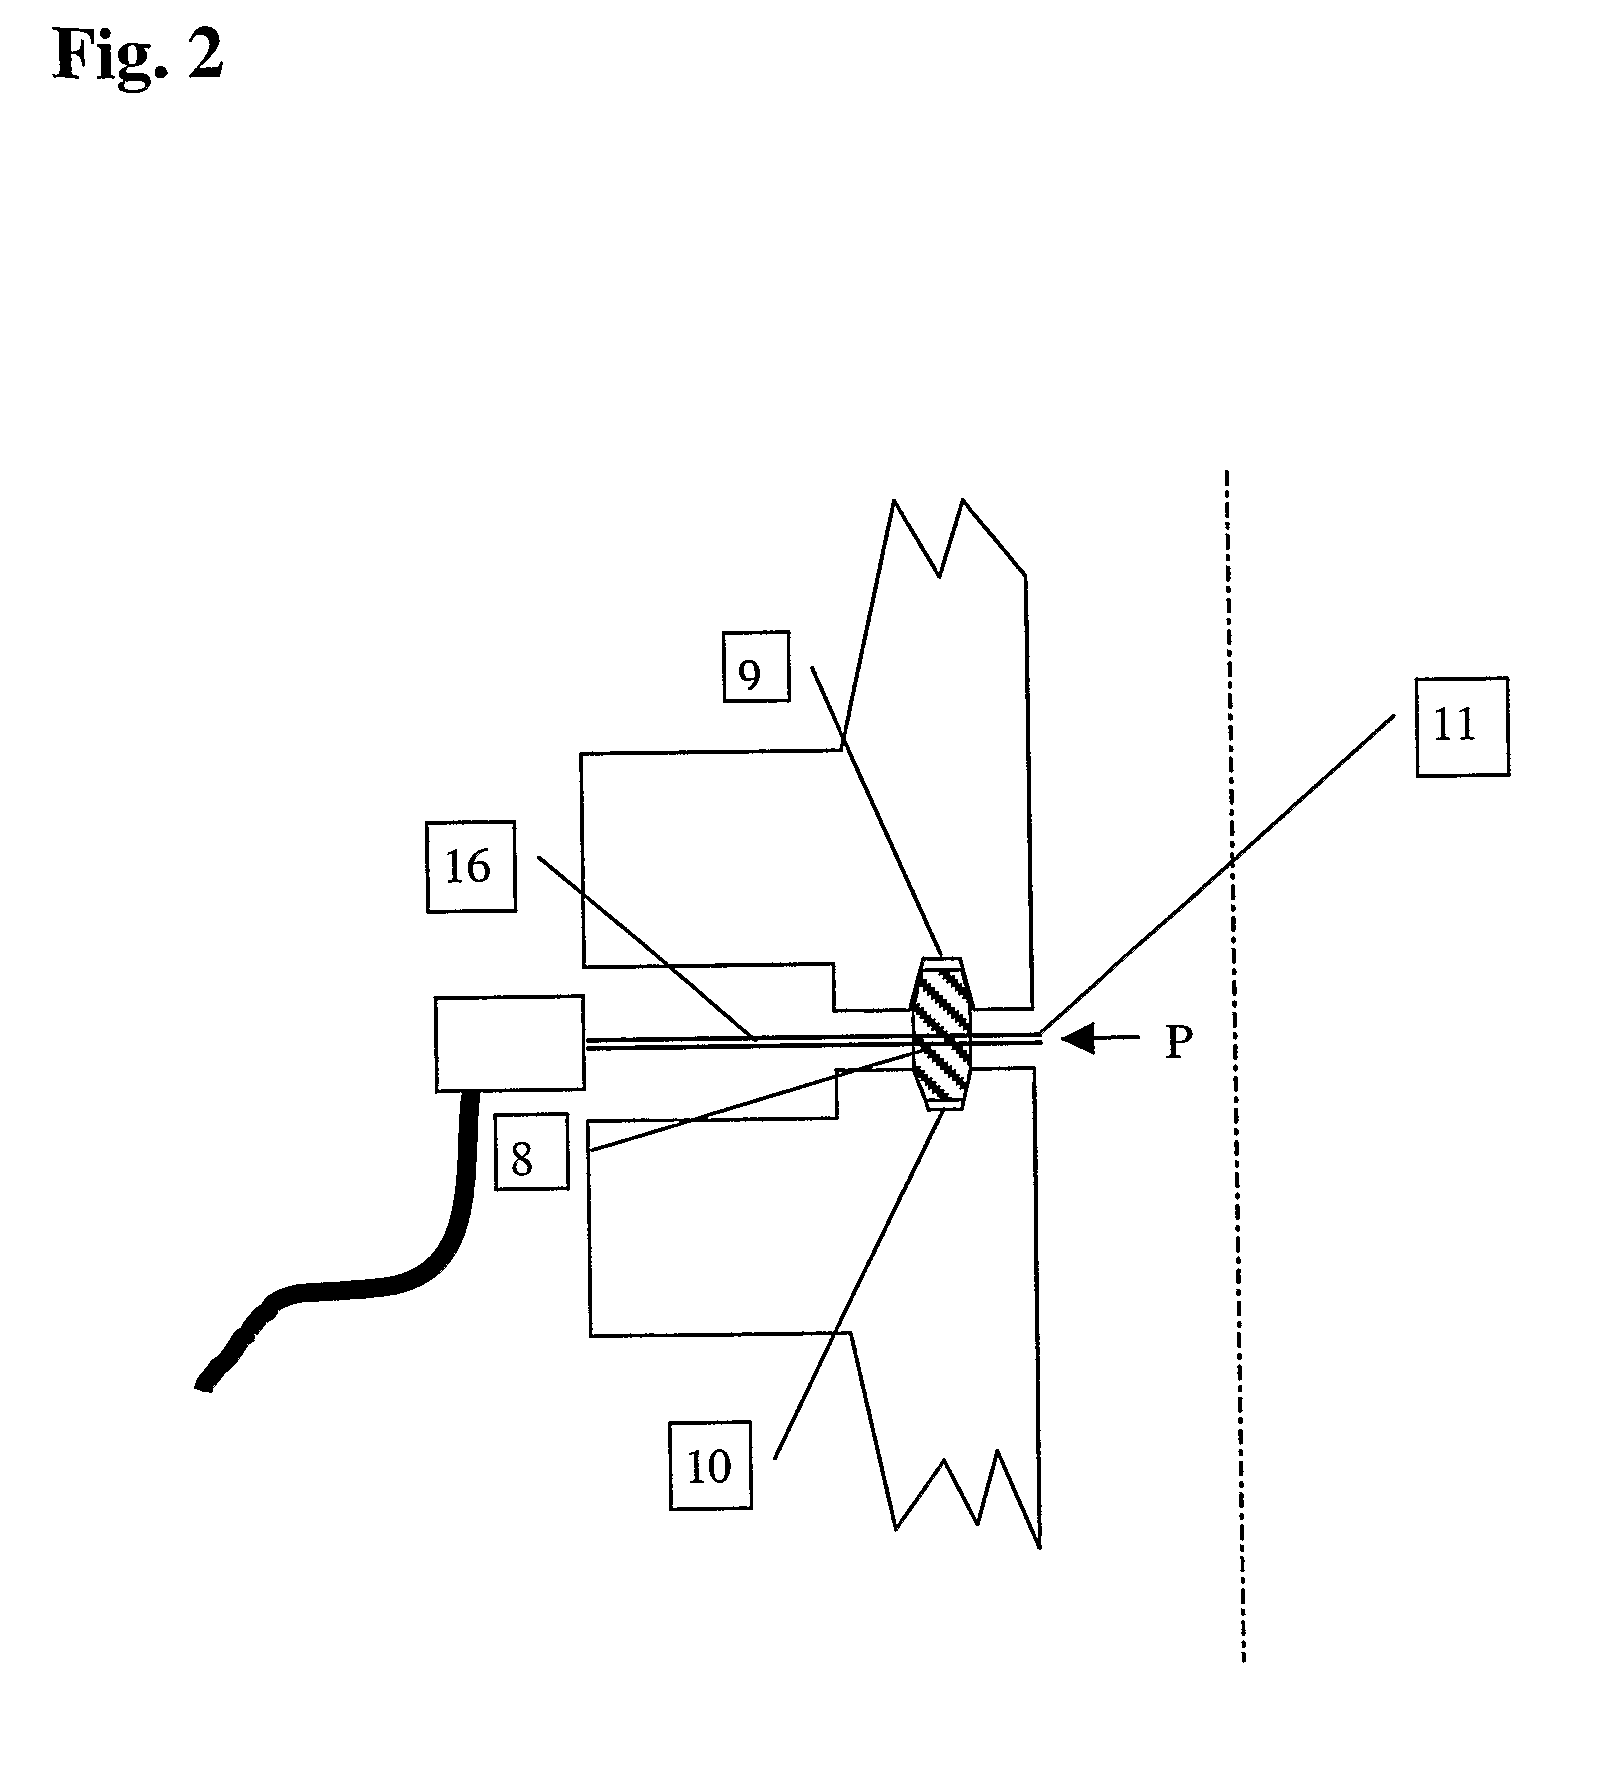 Arrangement or provision of a sensor or probe for the measuring of a condition in a pipe or the like